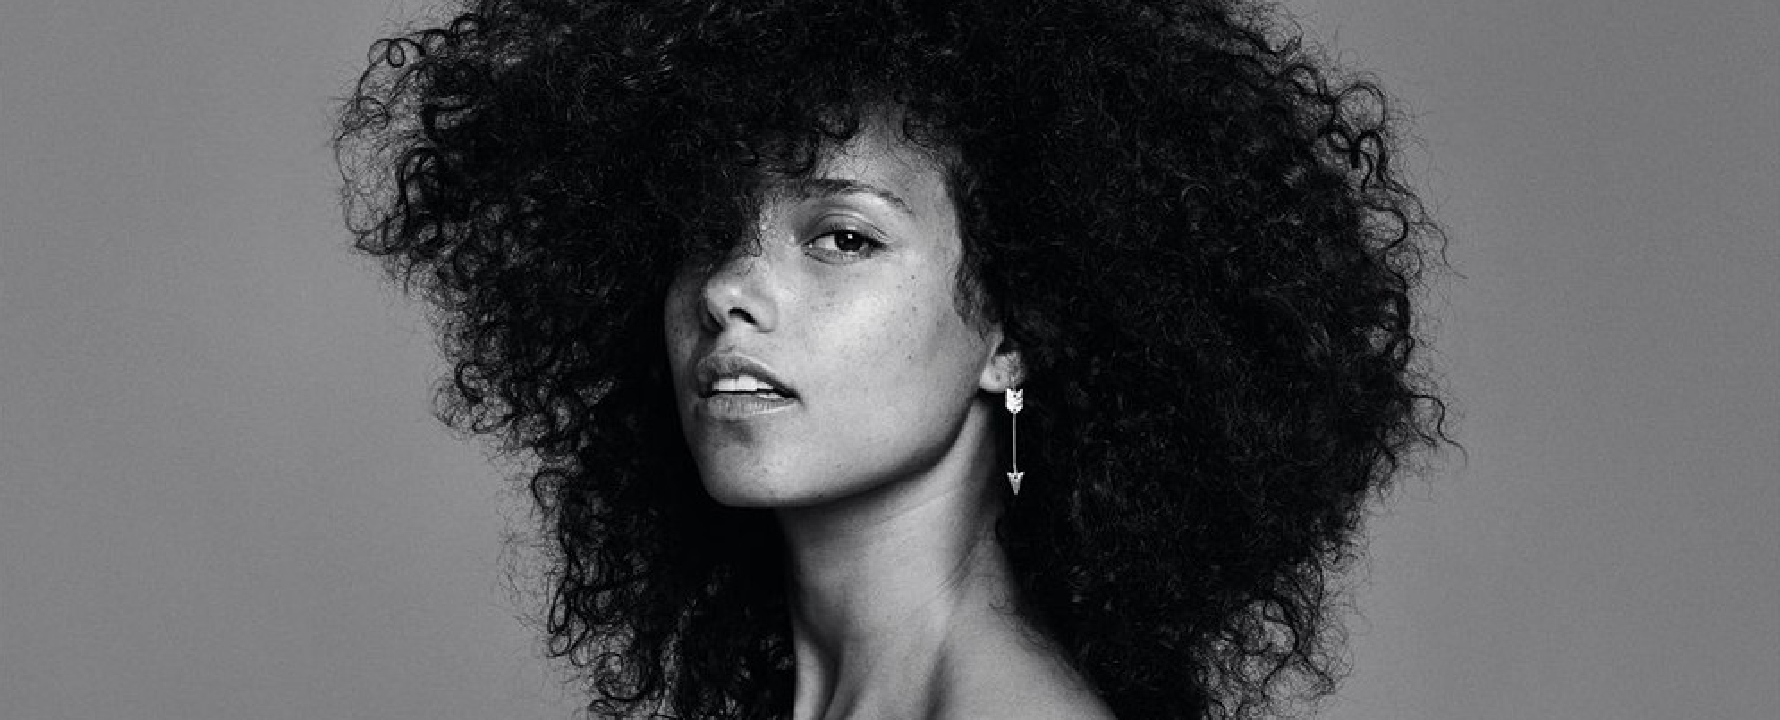 Promotional photograph of Alicia Keys.